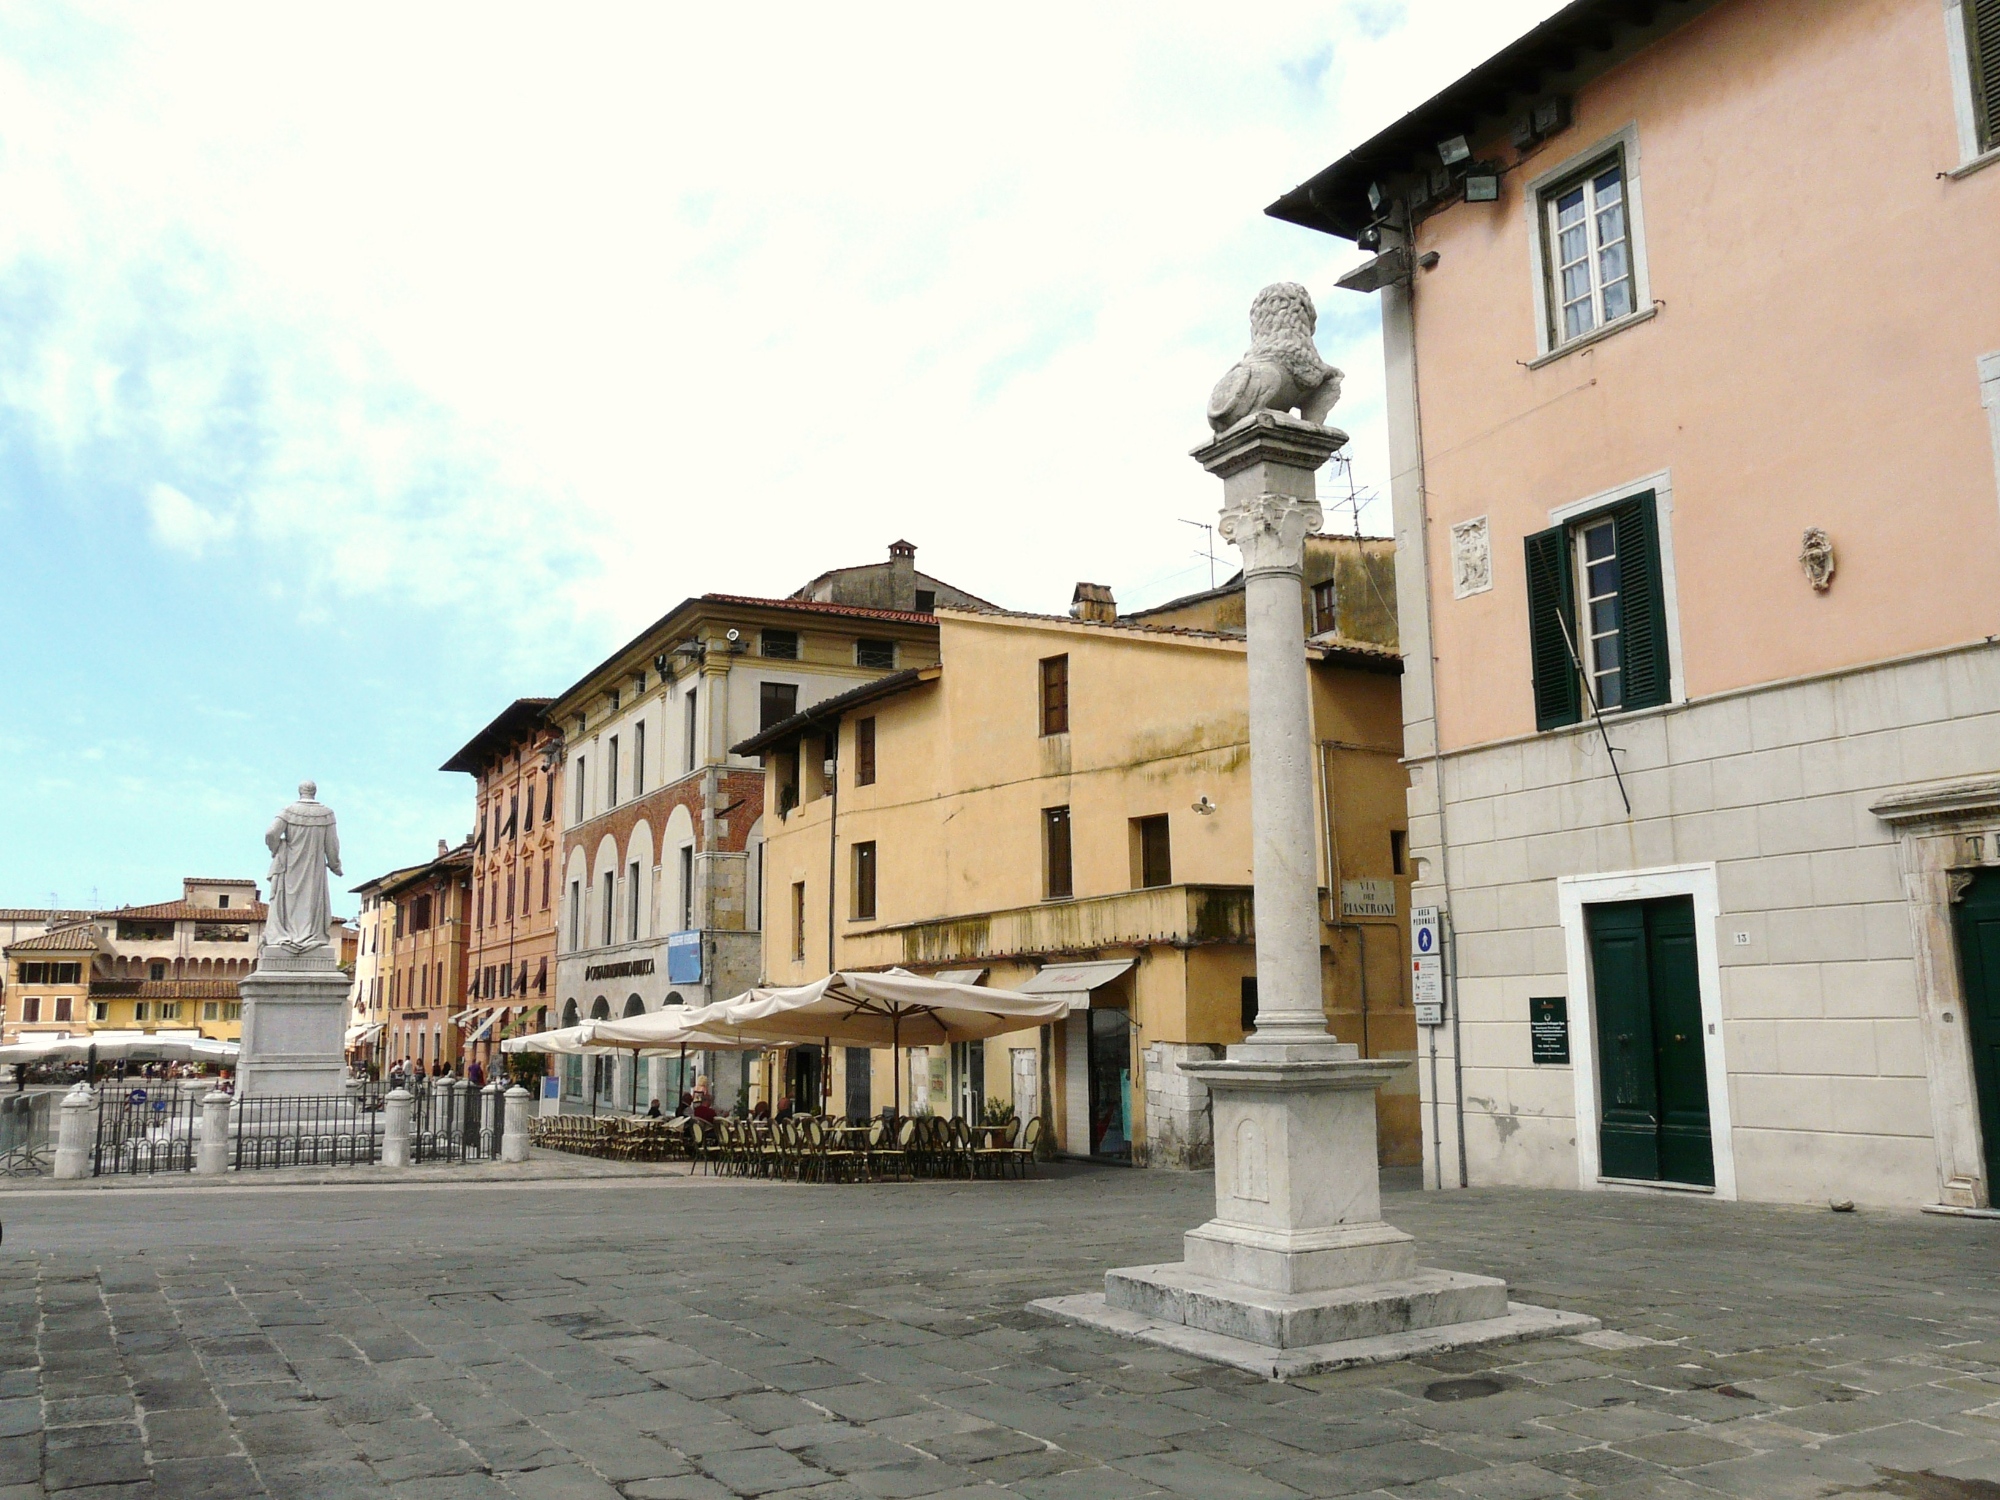 A view of piazza Duomo